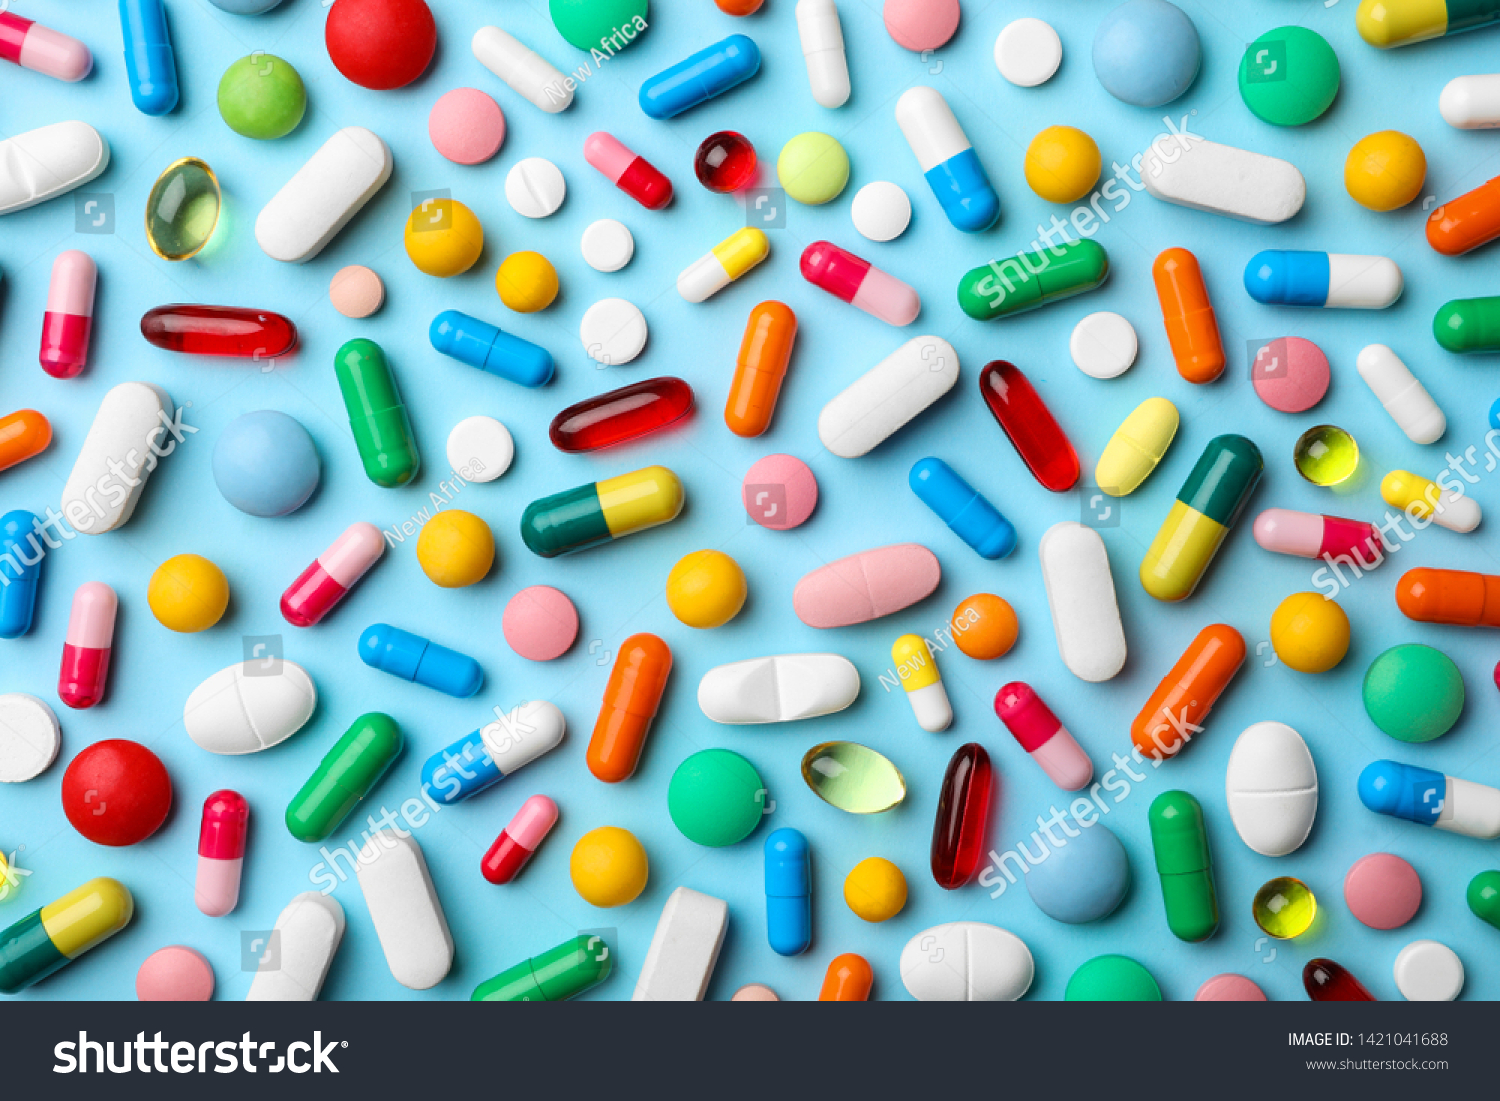 Different pills on color background, flat lay #1421041688